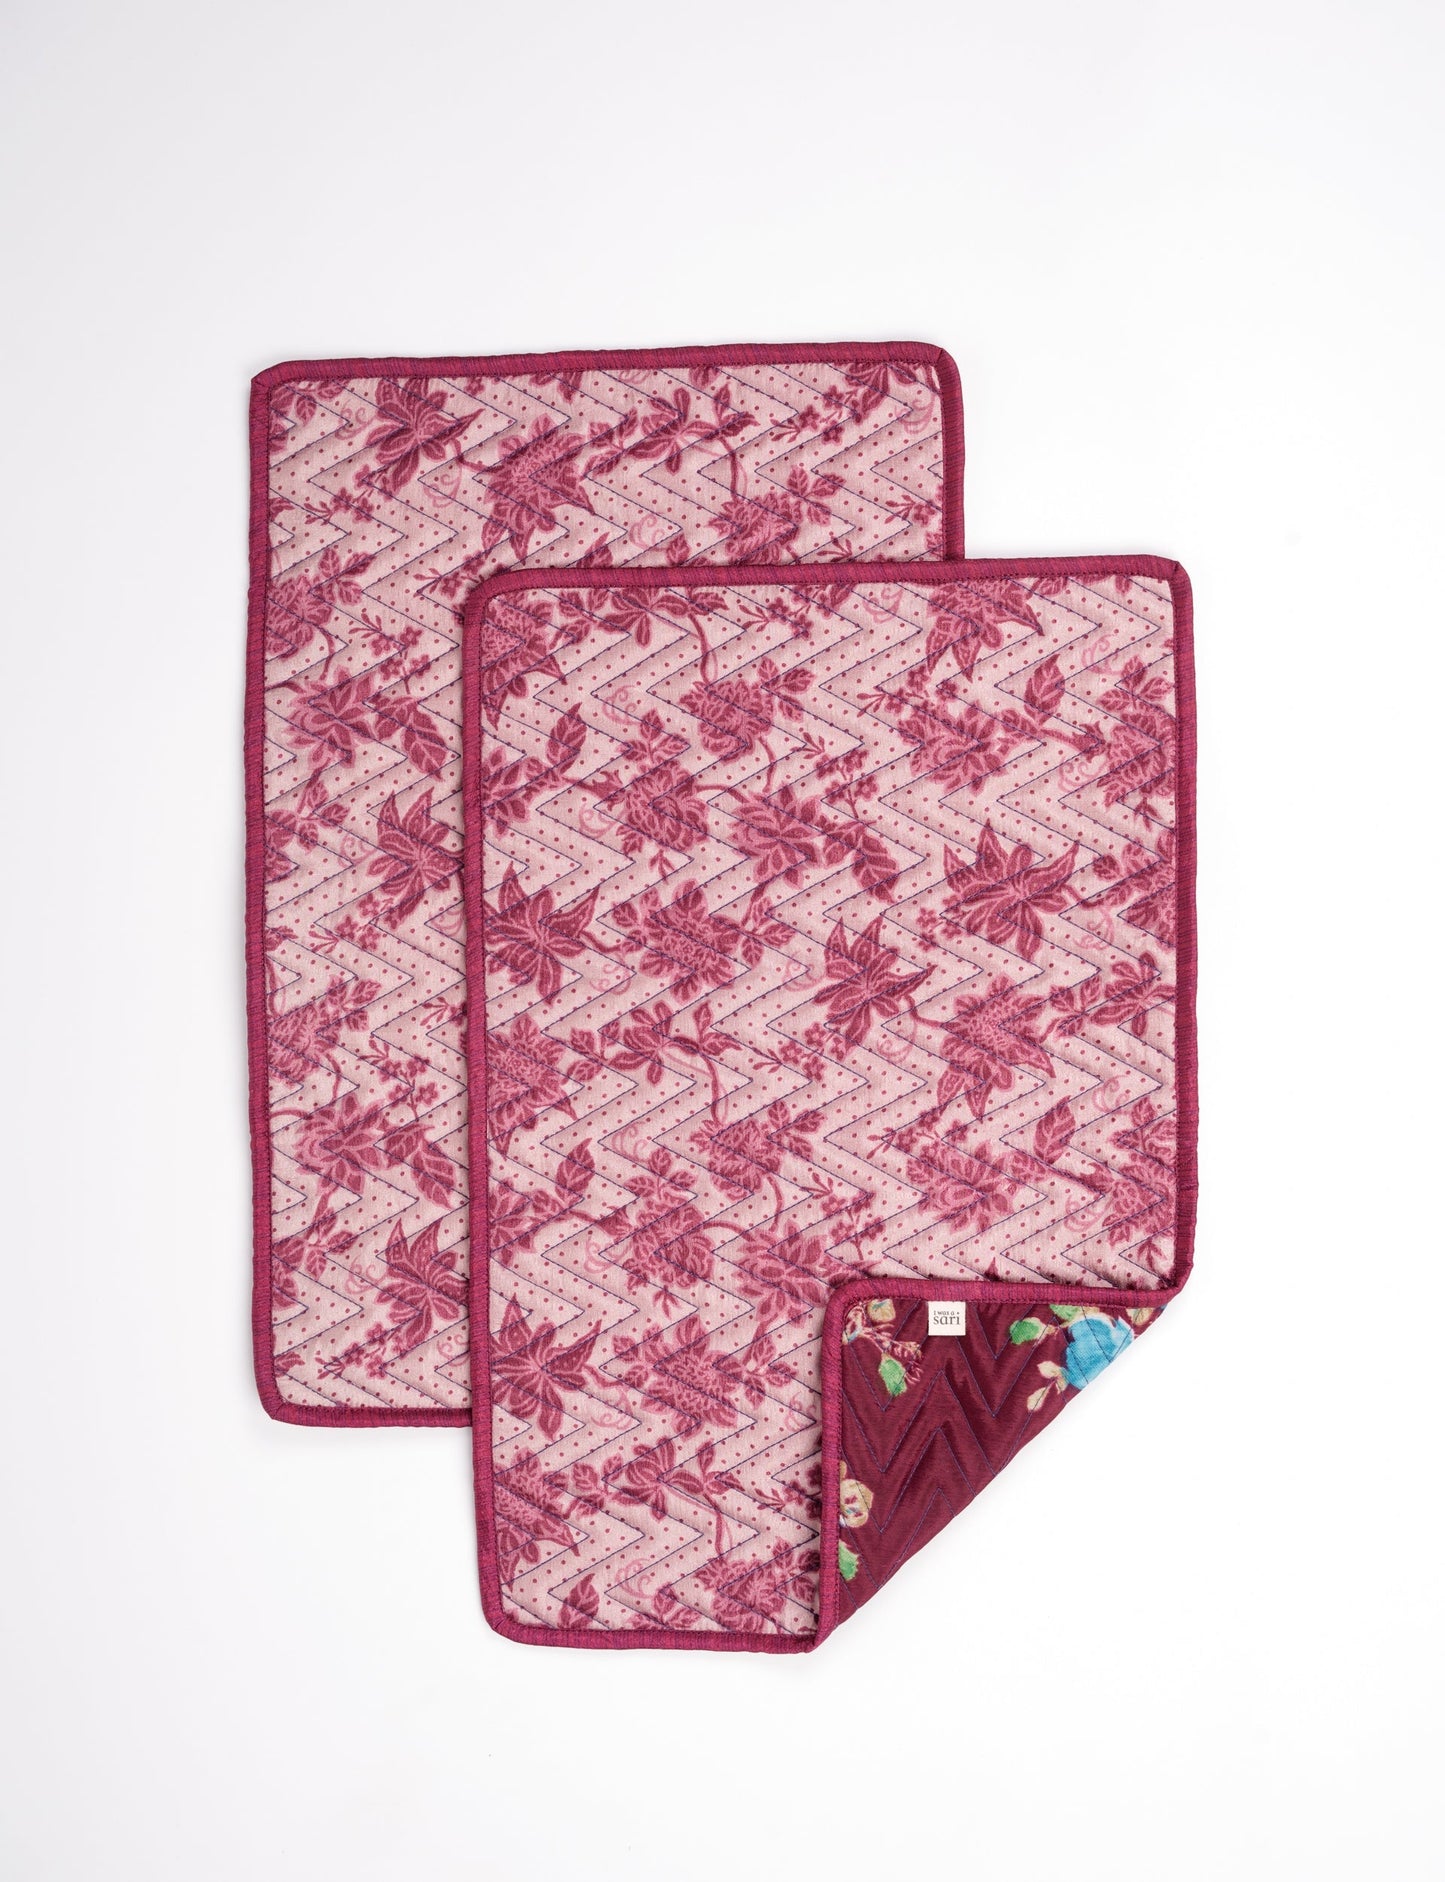 Quilted rectangular placement set of 2 made from upcycled saris and cotton canvas, eco-friendly dining accessories for ethical consumers.